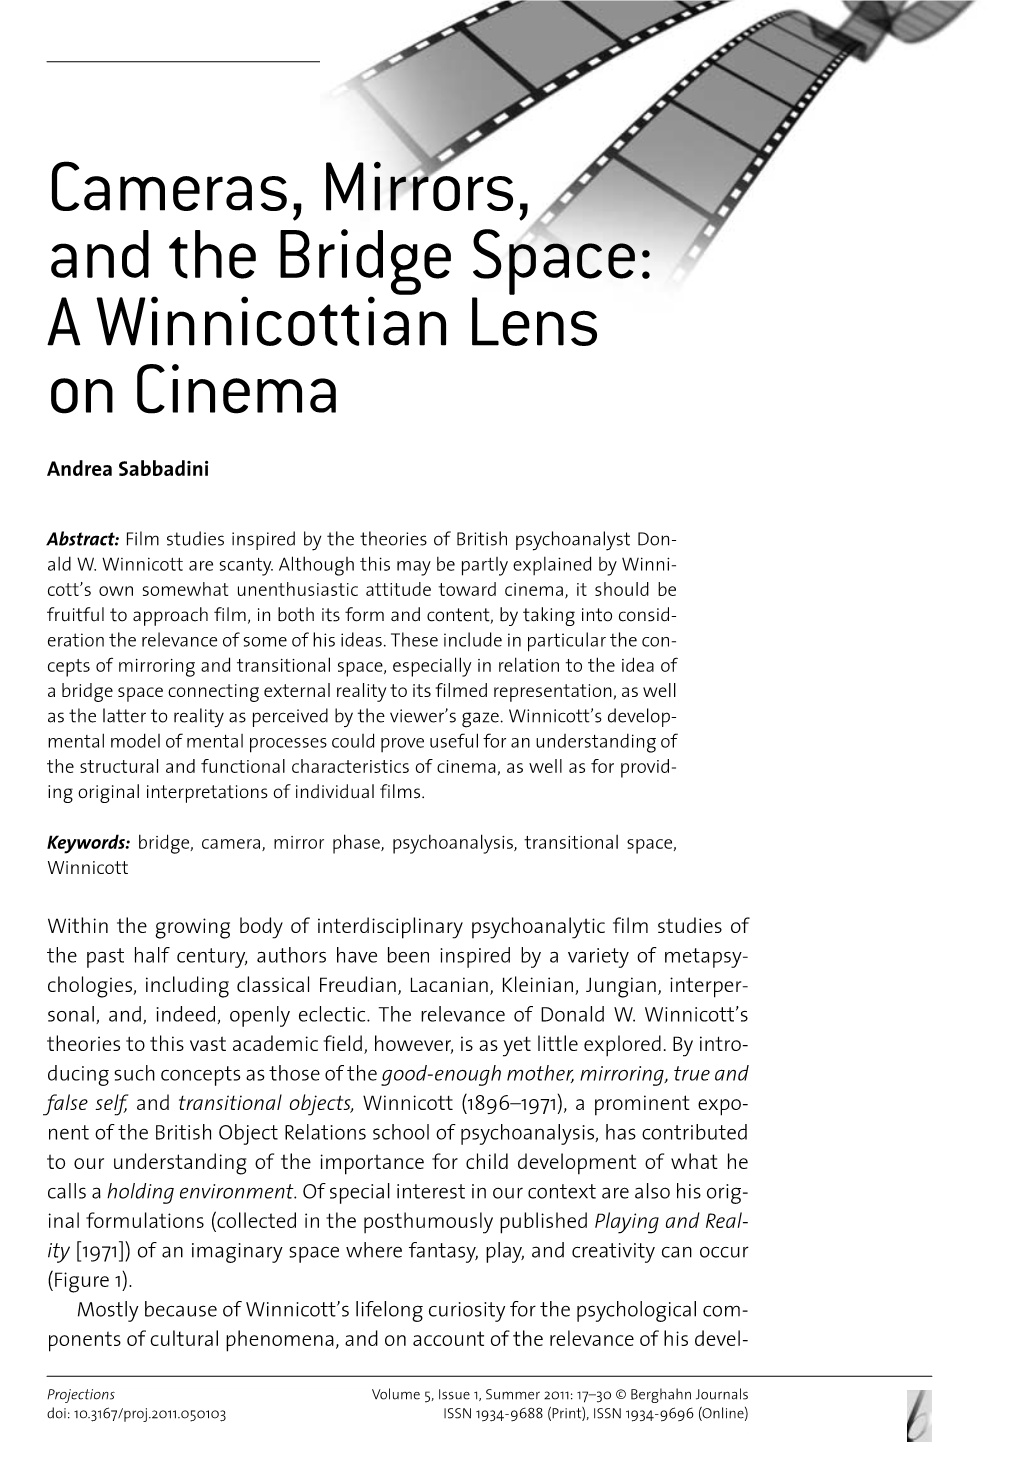 Cameras, Mirrors, and the Bridge Space: a Winnicottian Lens on Cinema